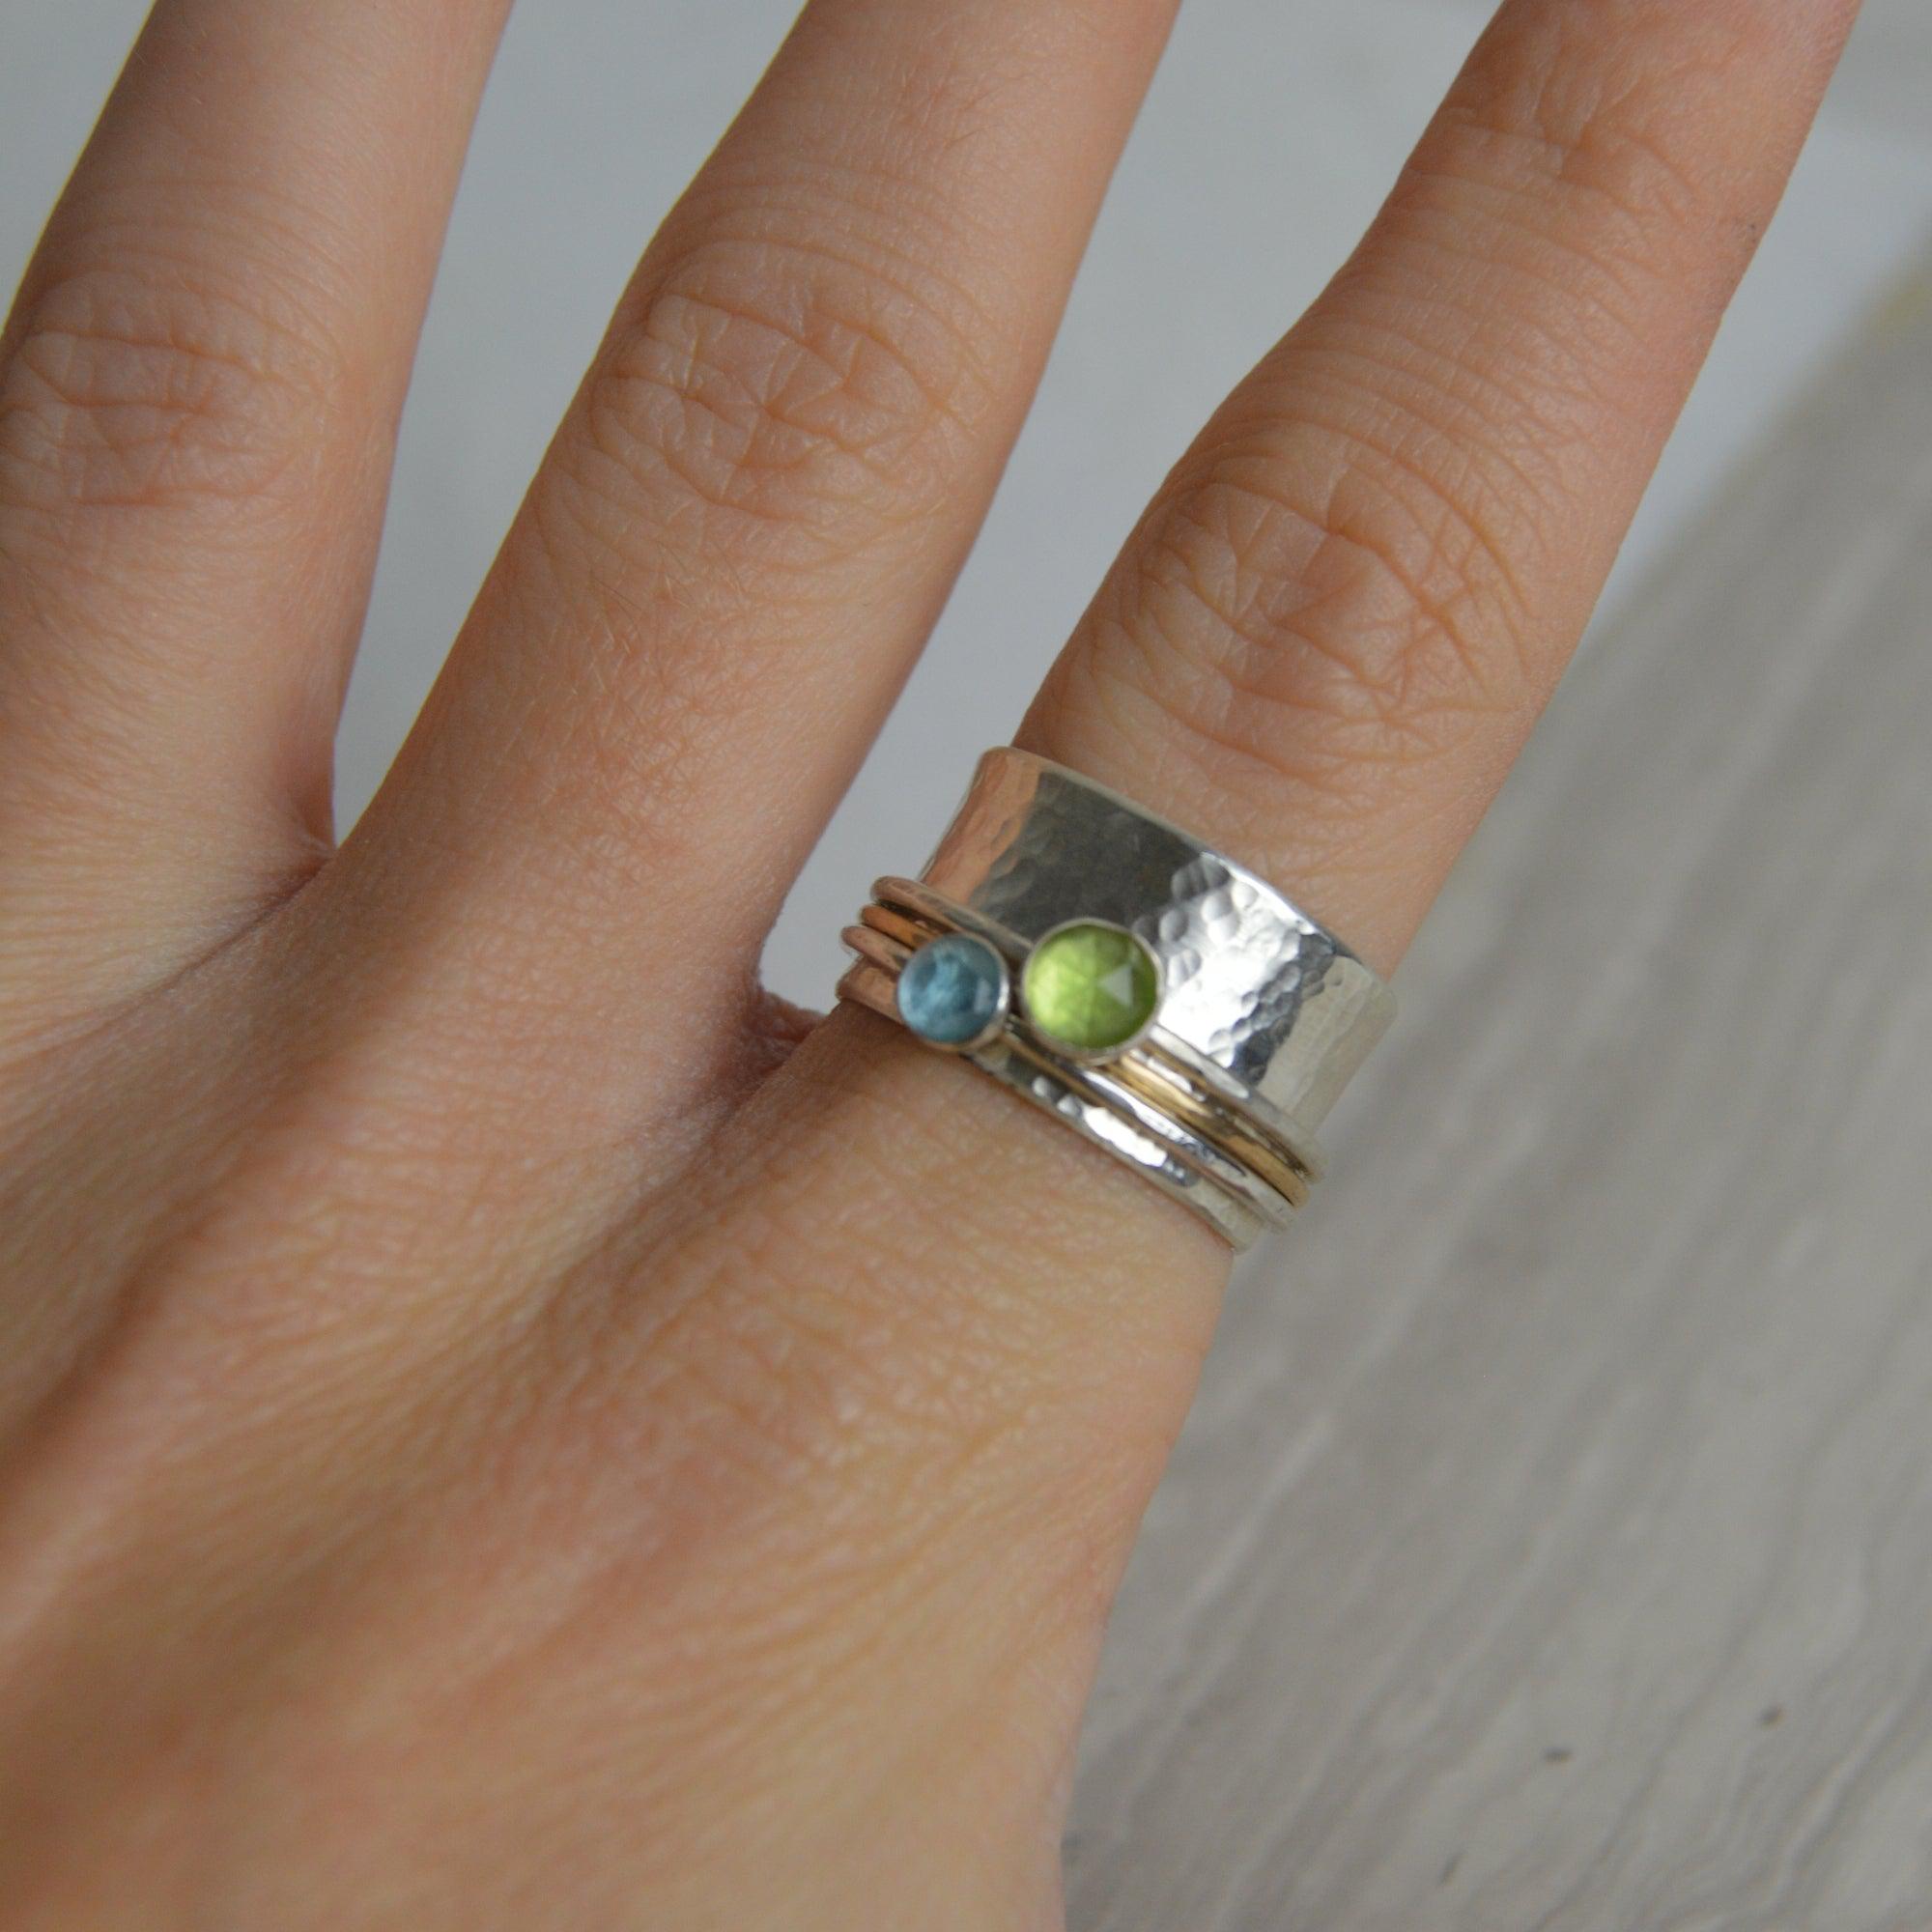 Peridot & Topaz Spinning Ring - Made to order - The Nancy Smillie Shop - Art, Jewellery & Designer Gifts Glasgow